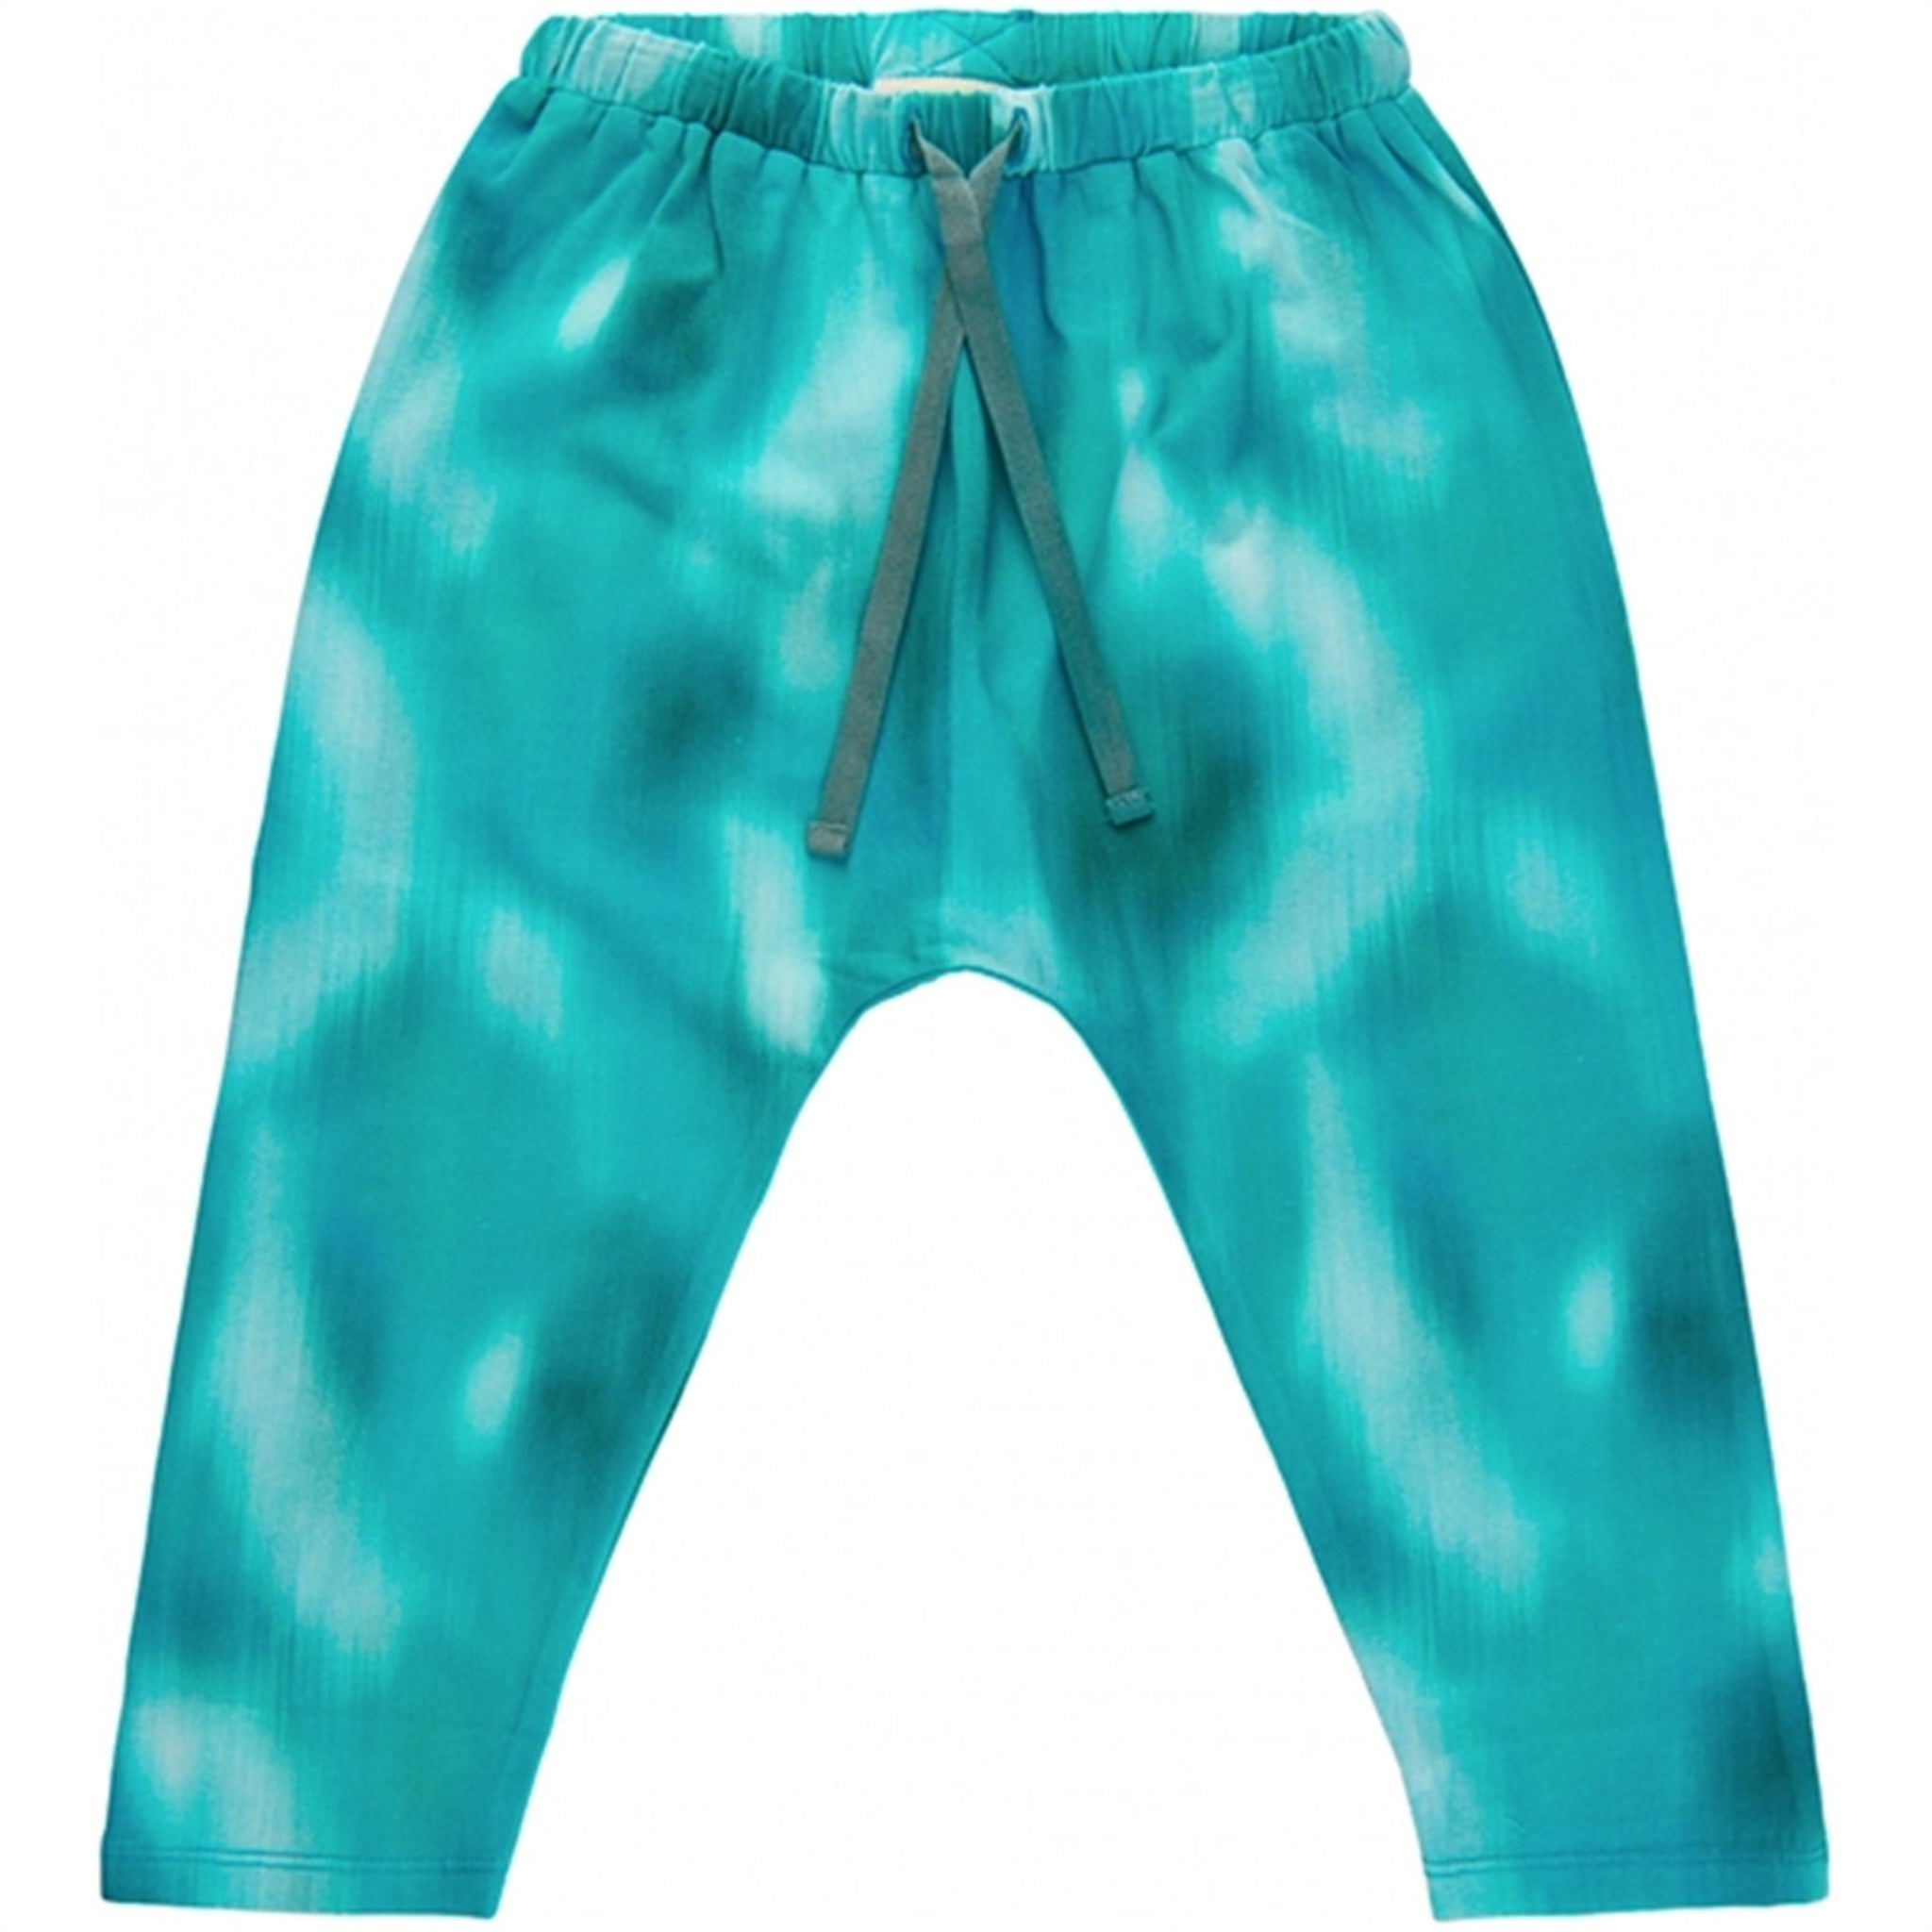 Soft Gallery Aquarelle Hailey Reflection Green Pants